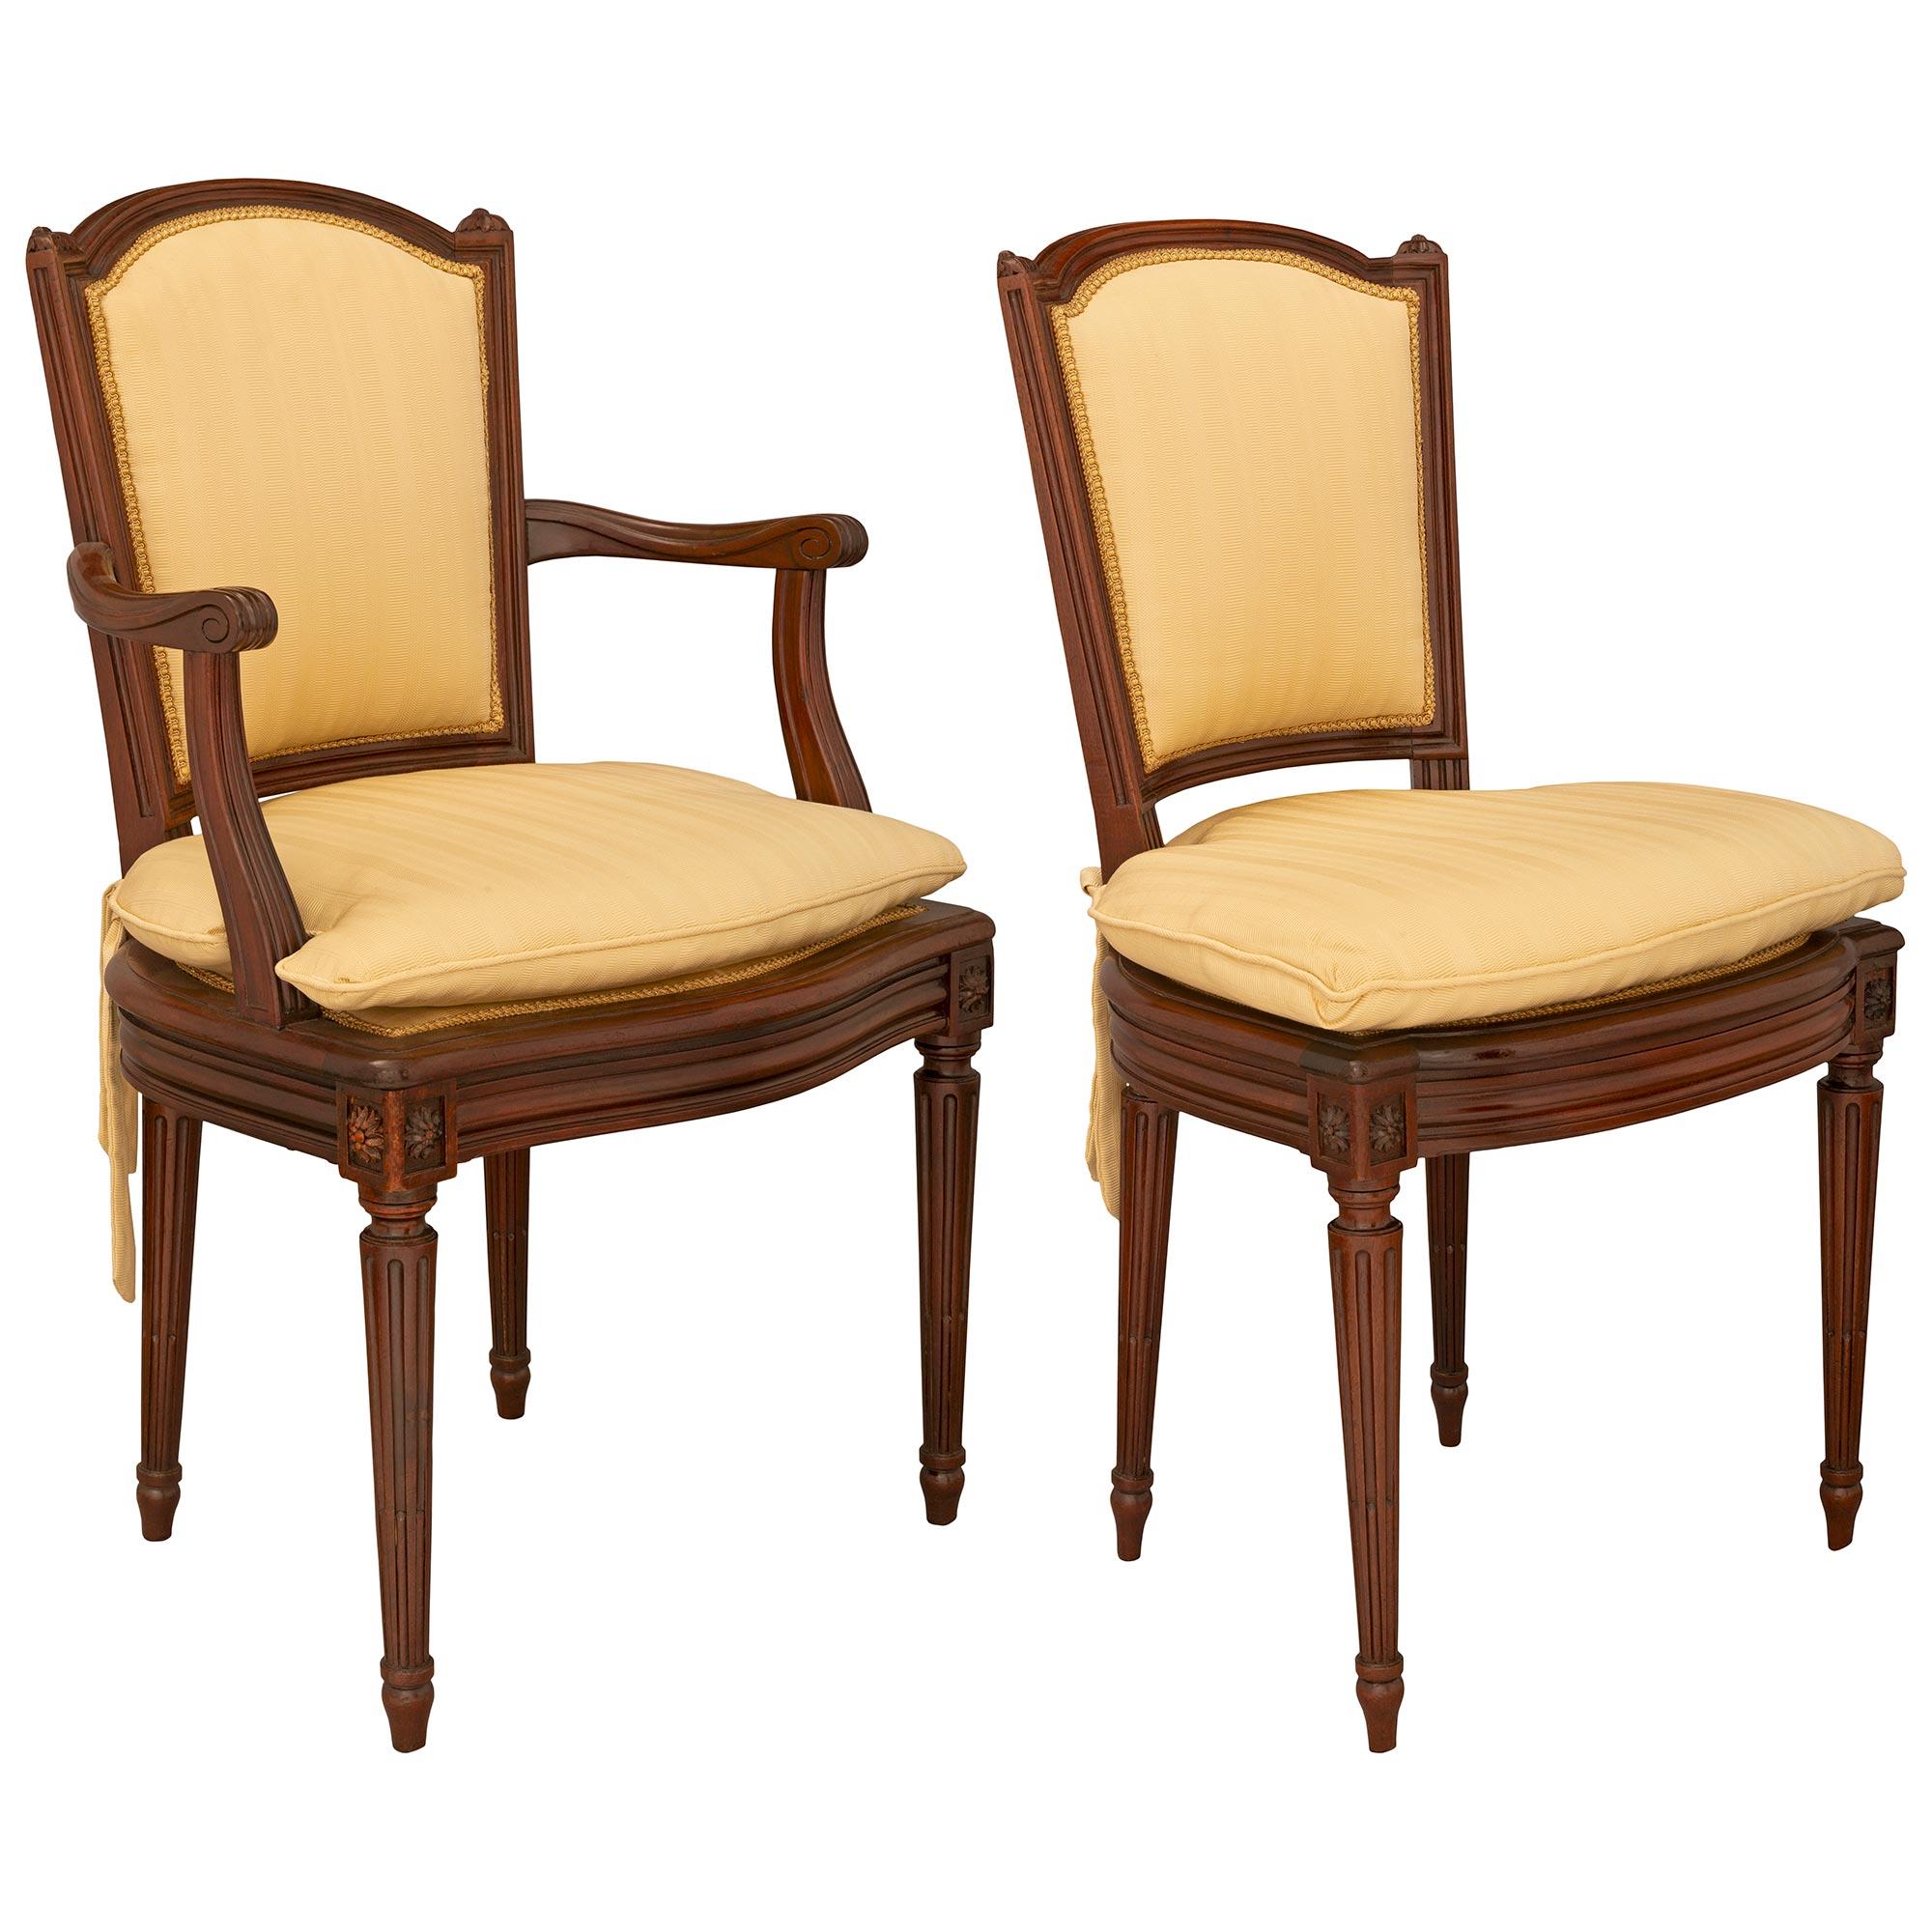 An attractive set of eight late 19th century Louis XVI st. mahogany dining chairs with six side and two armchairs. Each chair is raised on tapered fluted legs with top rosettes below a bombe shaped moulded frieze. Above is the curved and moulded